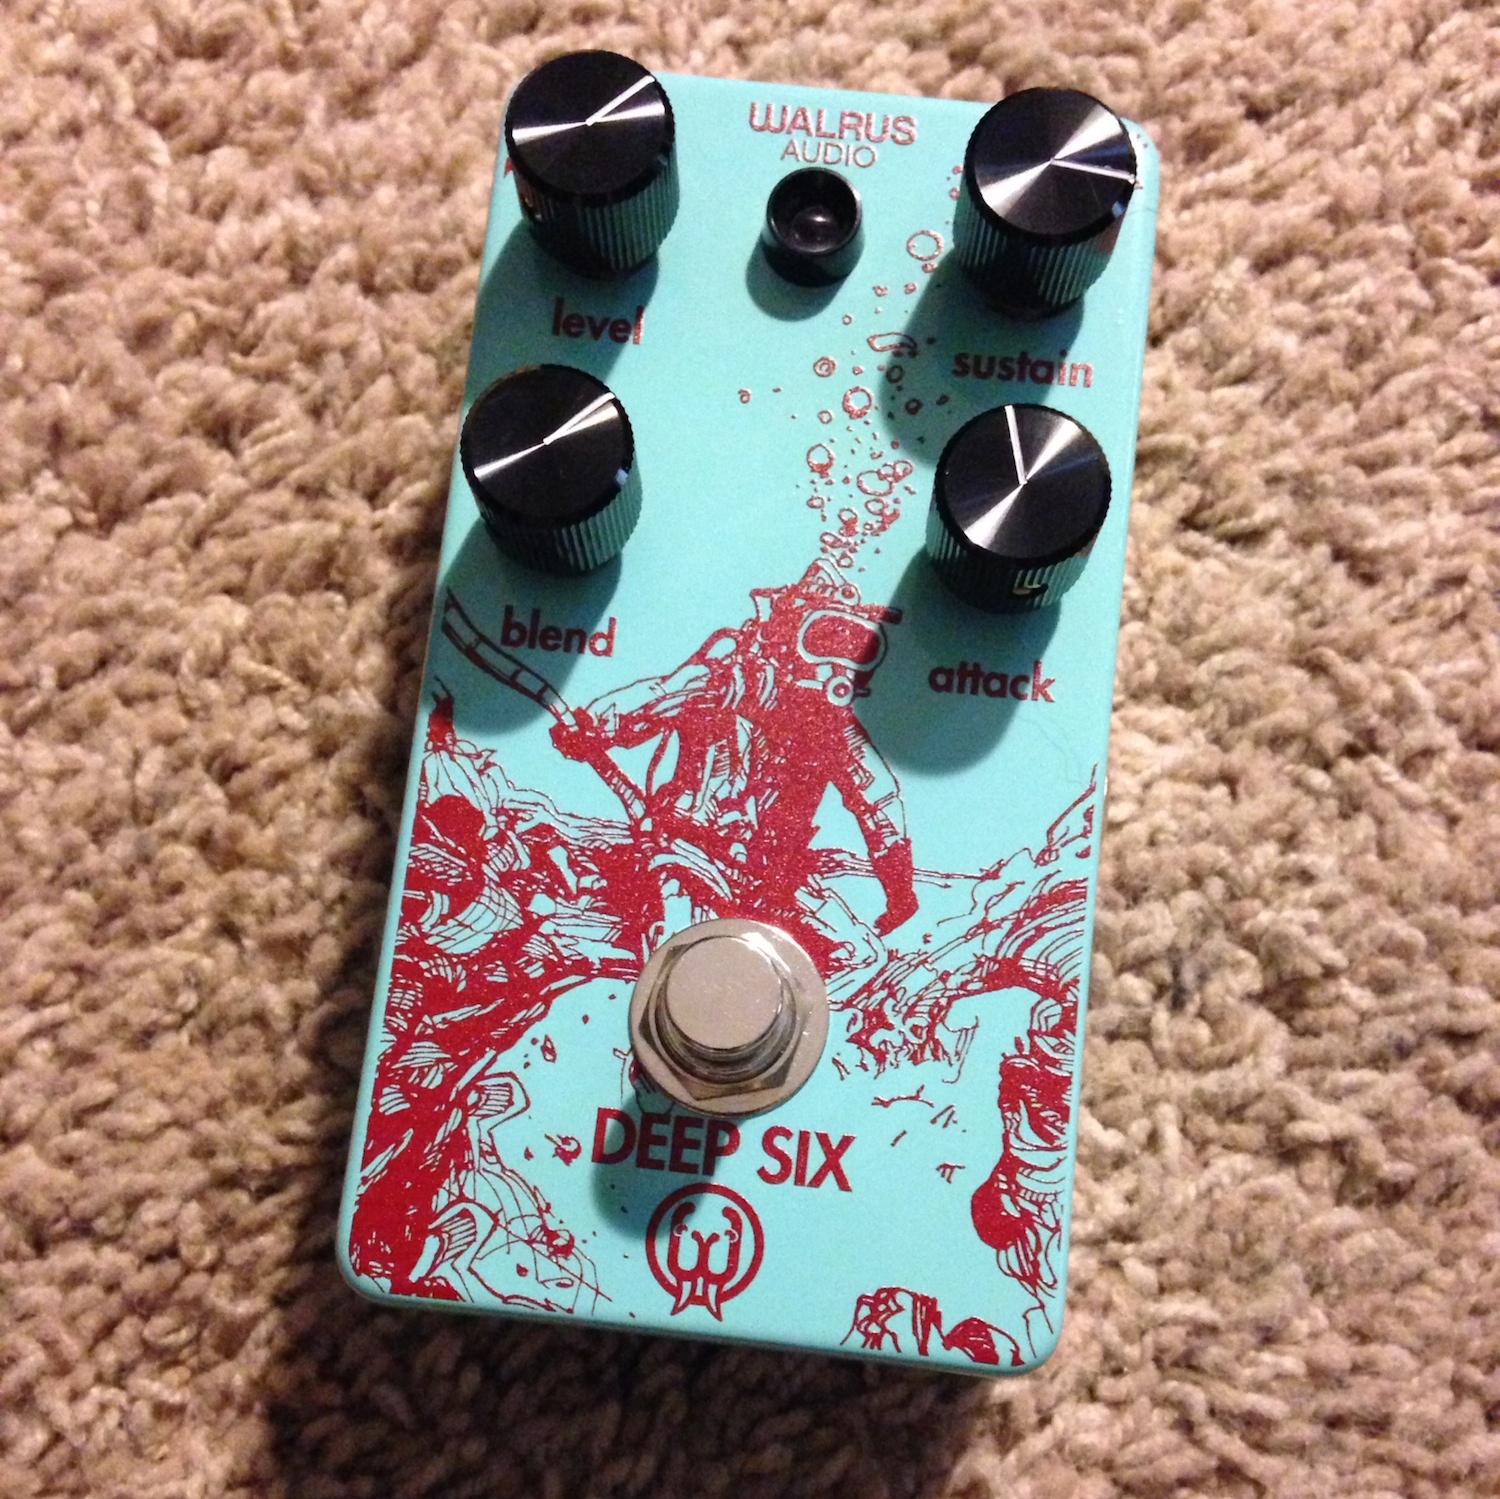 Walrus Audio Deep Six Compressor - Pedal of the Day